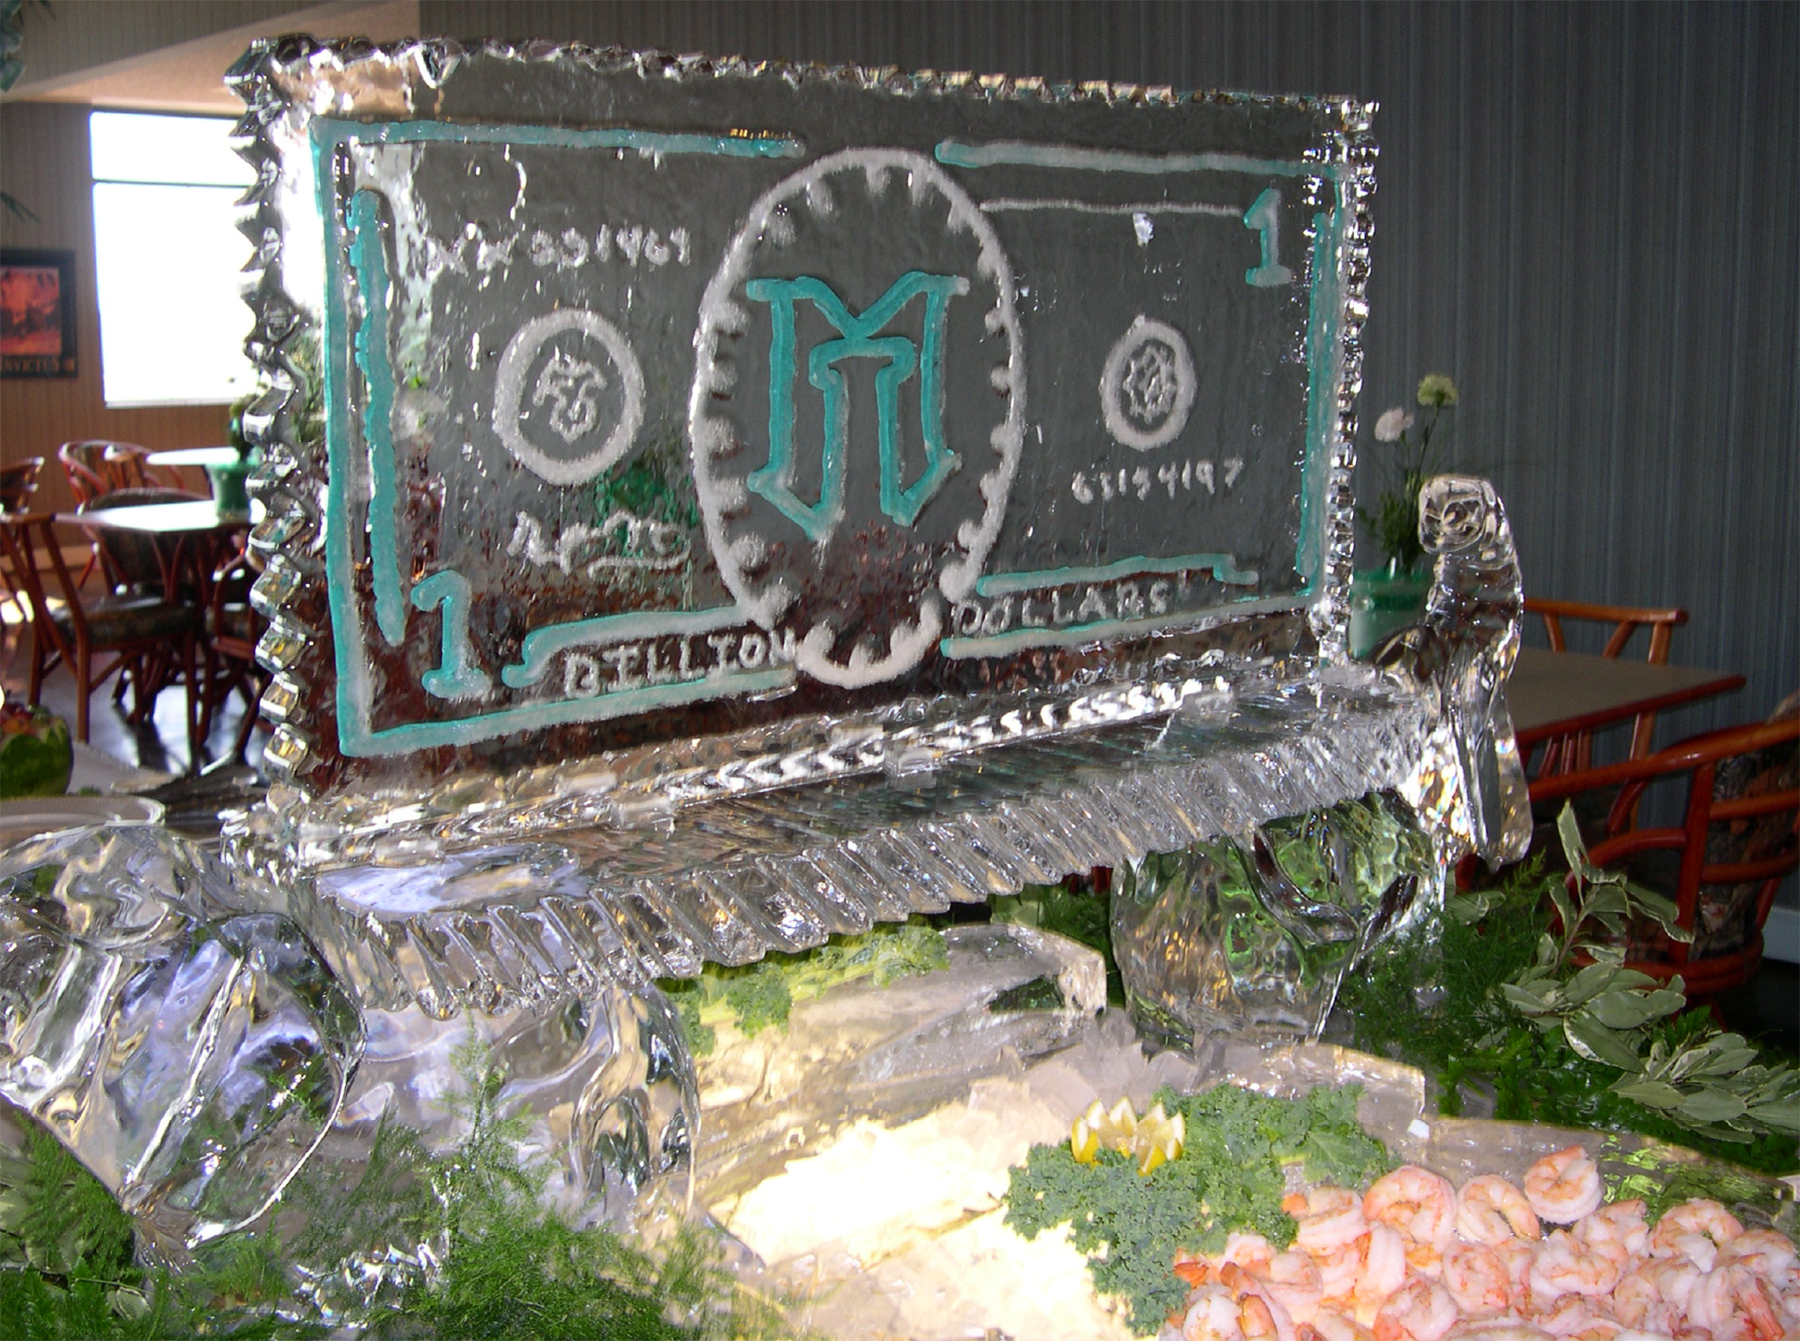 An ice sculpture representing Illinois Mutual’s one-billionth dollar in celebration of exceeding $1 billion in admitted assets.